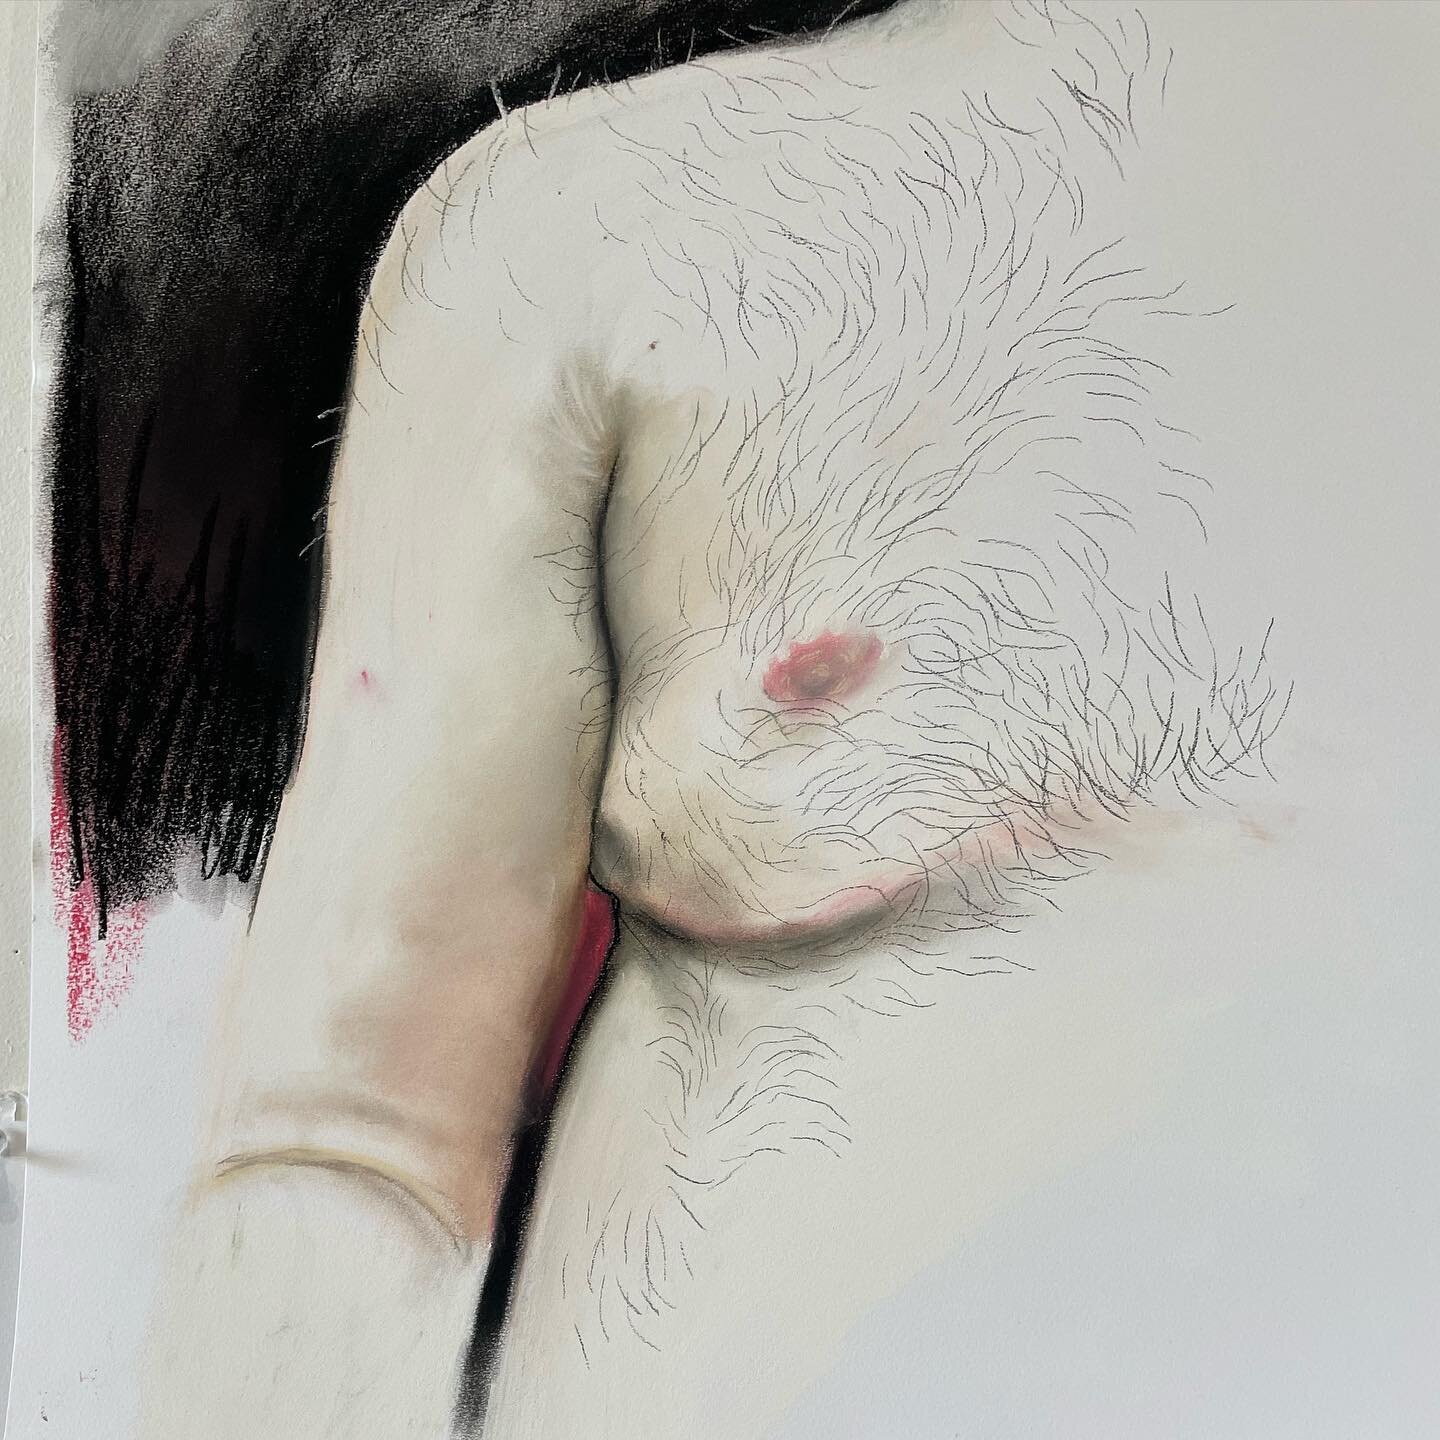 Just made a huge fucking mess with some pastels #queer #queerart #trans #transartist #portlandoregonartist #pastels #pastel #body #pdxartist #artstudio #pncaalumni #selfportrait #transmasc #topsurgery